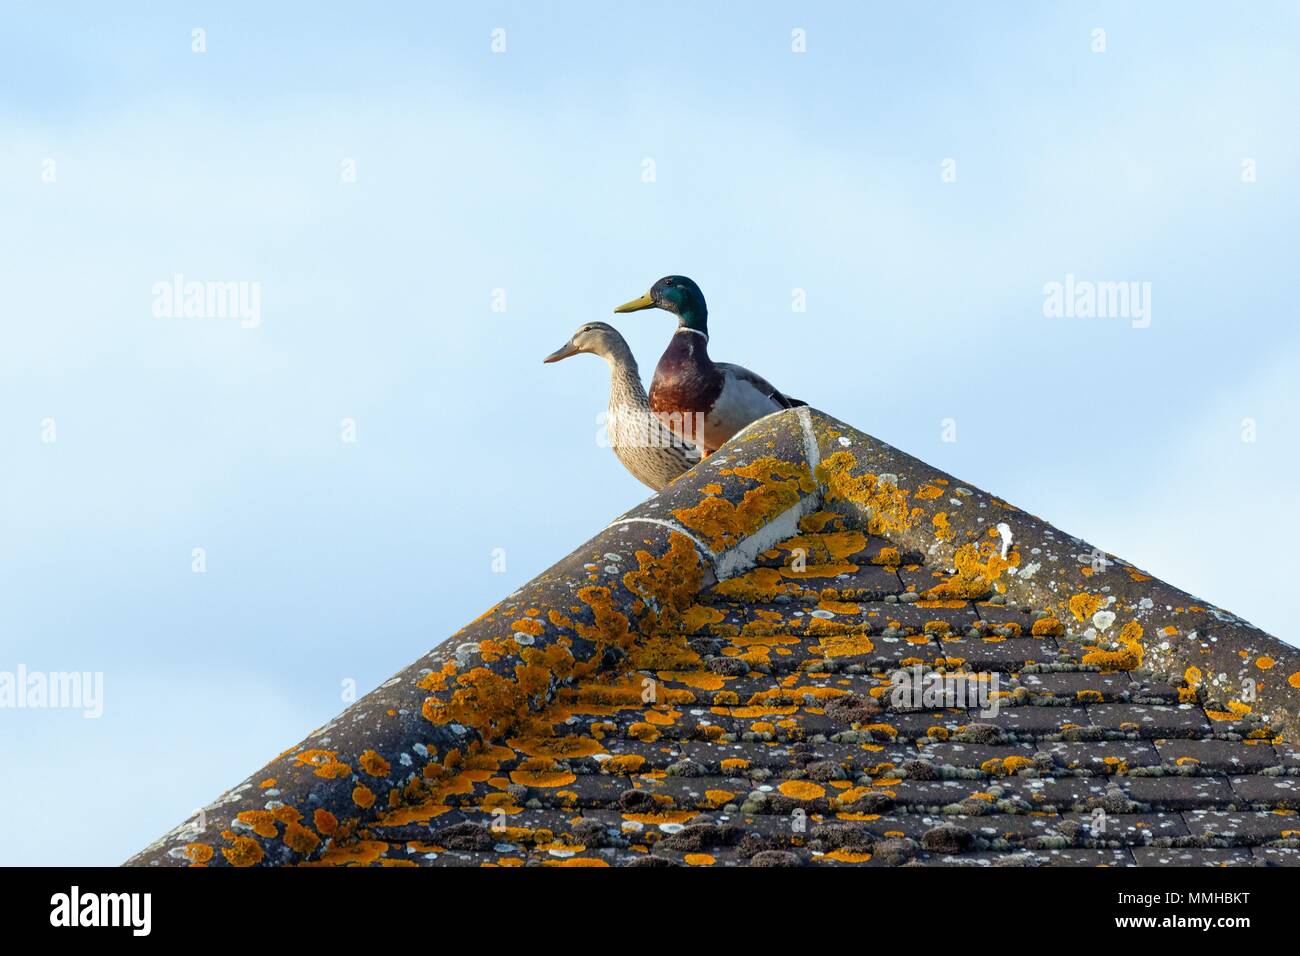 A pair of Mallard ducks perched on the apex of a pitched roof Stock Photo